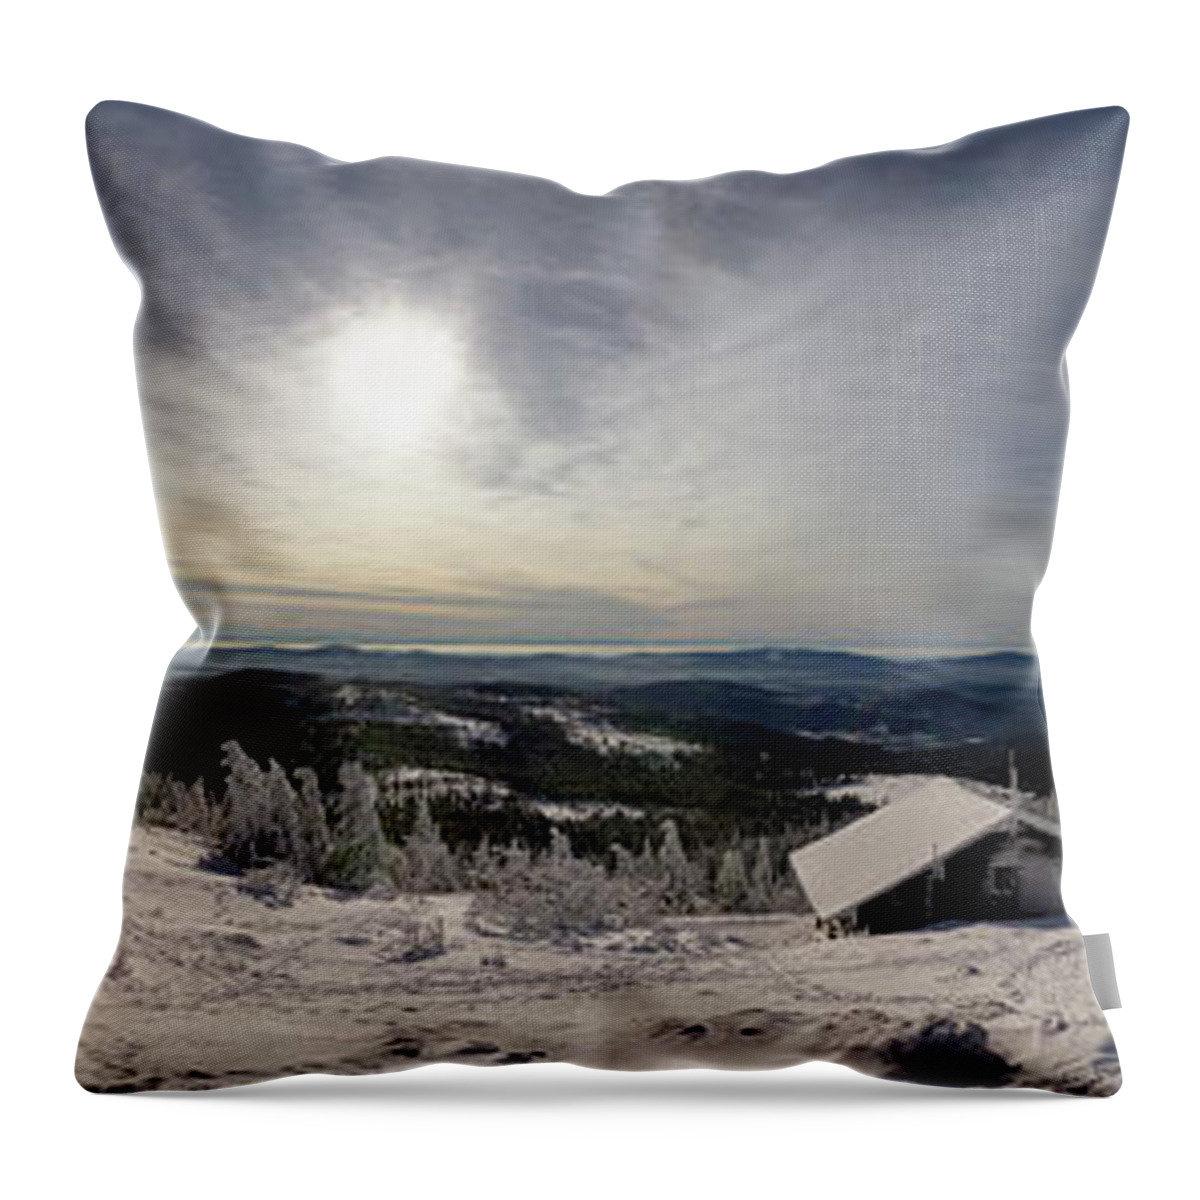 Tranquility Throw Pillow featuring the photograph Germany, View Of Great Arber Highest by Westend61